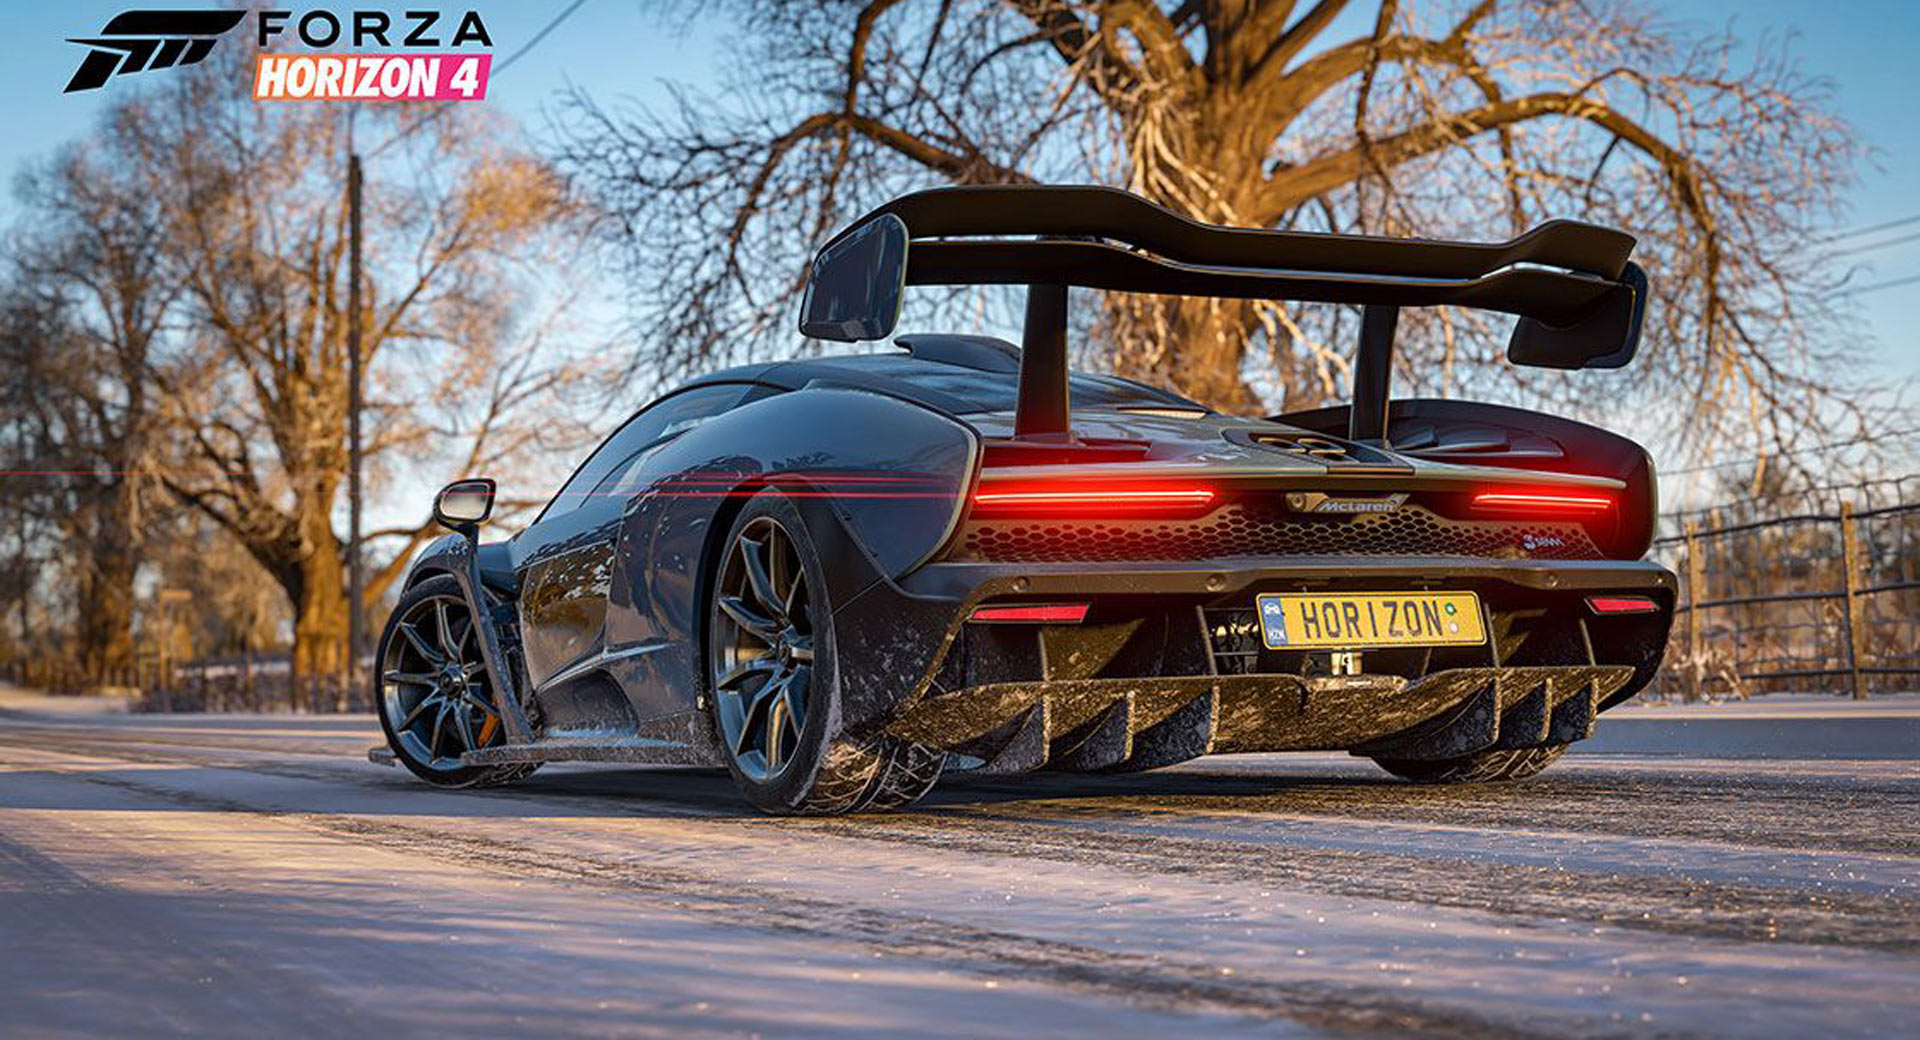 Massive Forza Horizon 4 Leak Suggests Over 120 New Cars Coming To Game